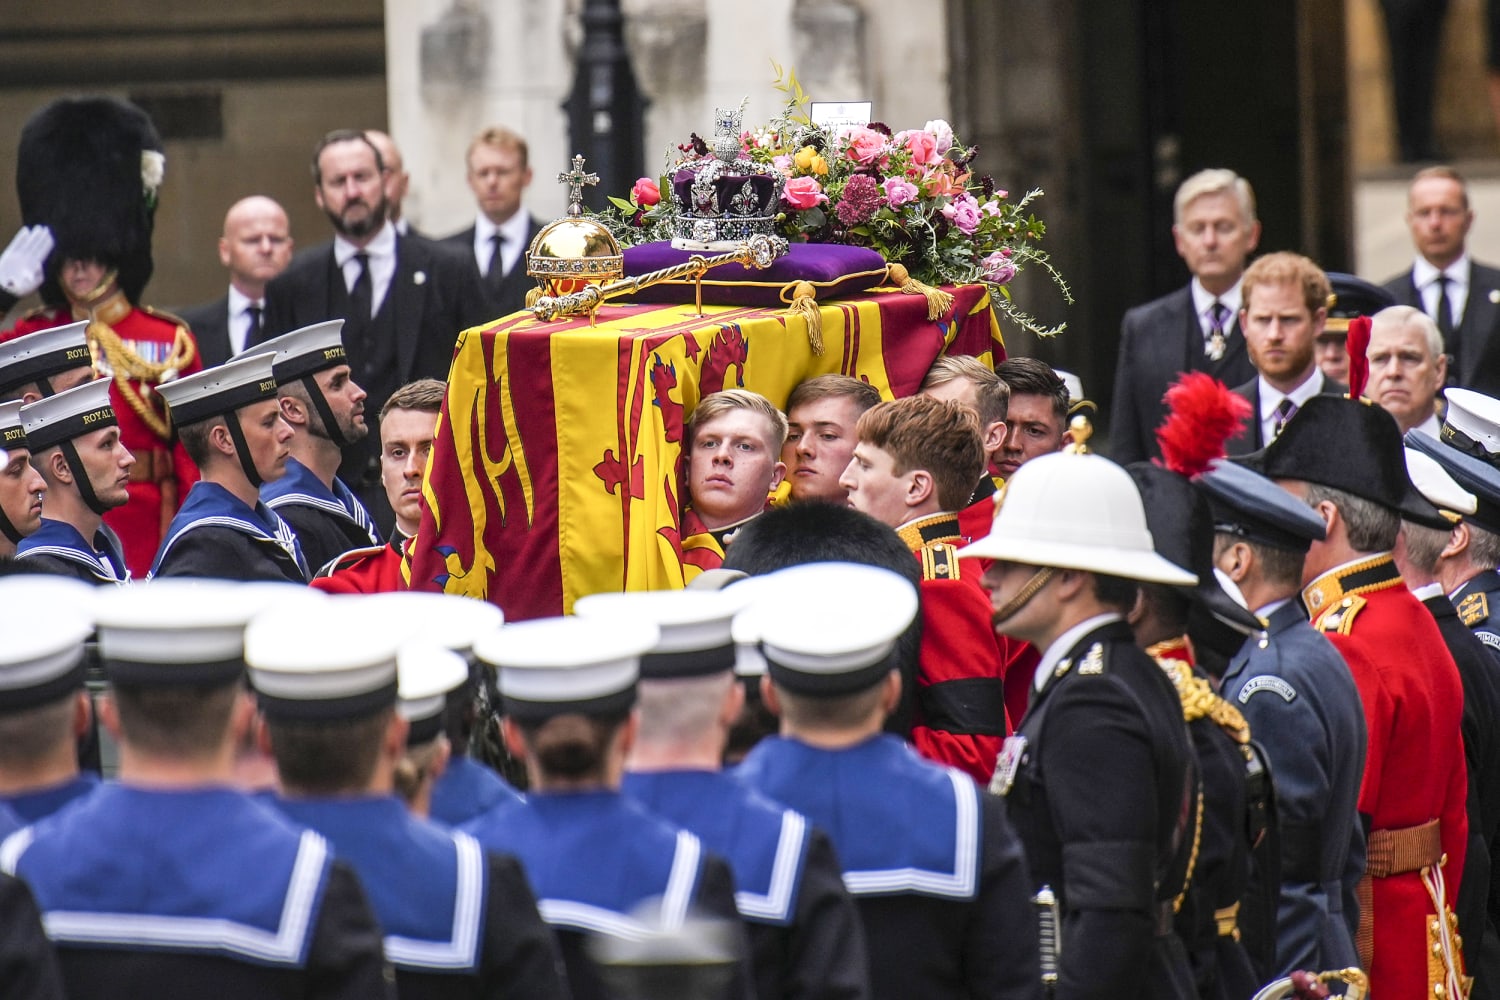 State funeral for Queen Elizabeth II marks the end of an era